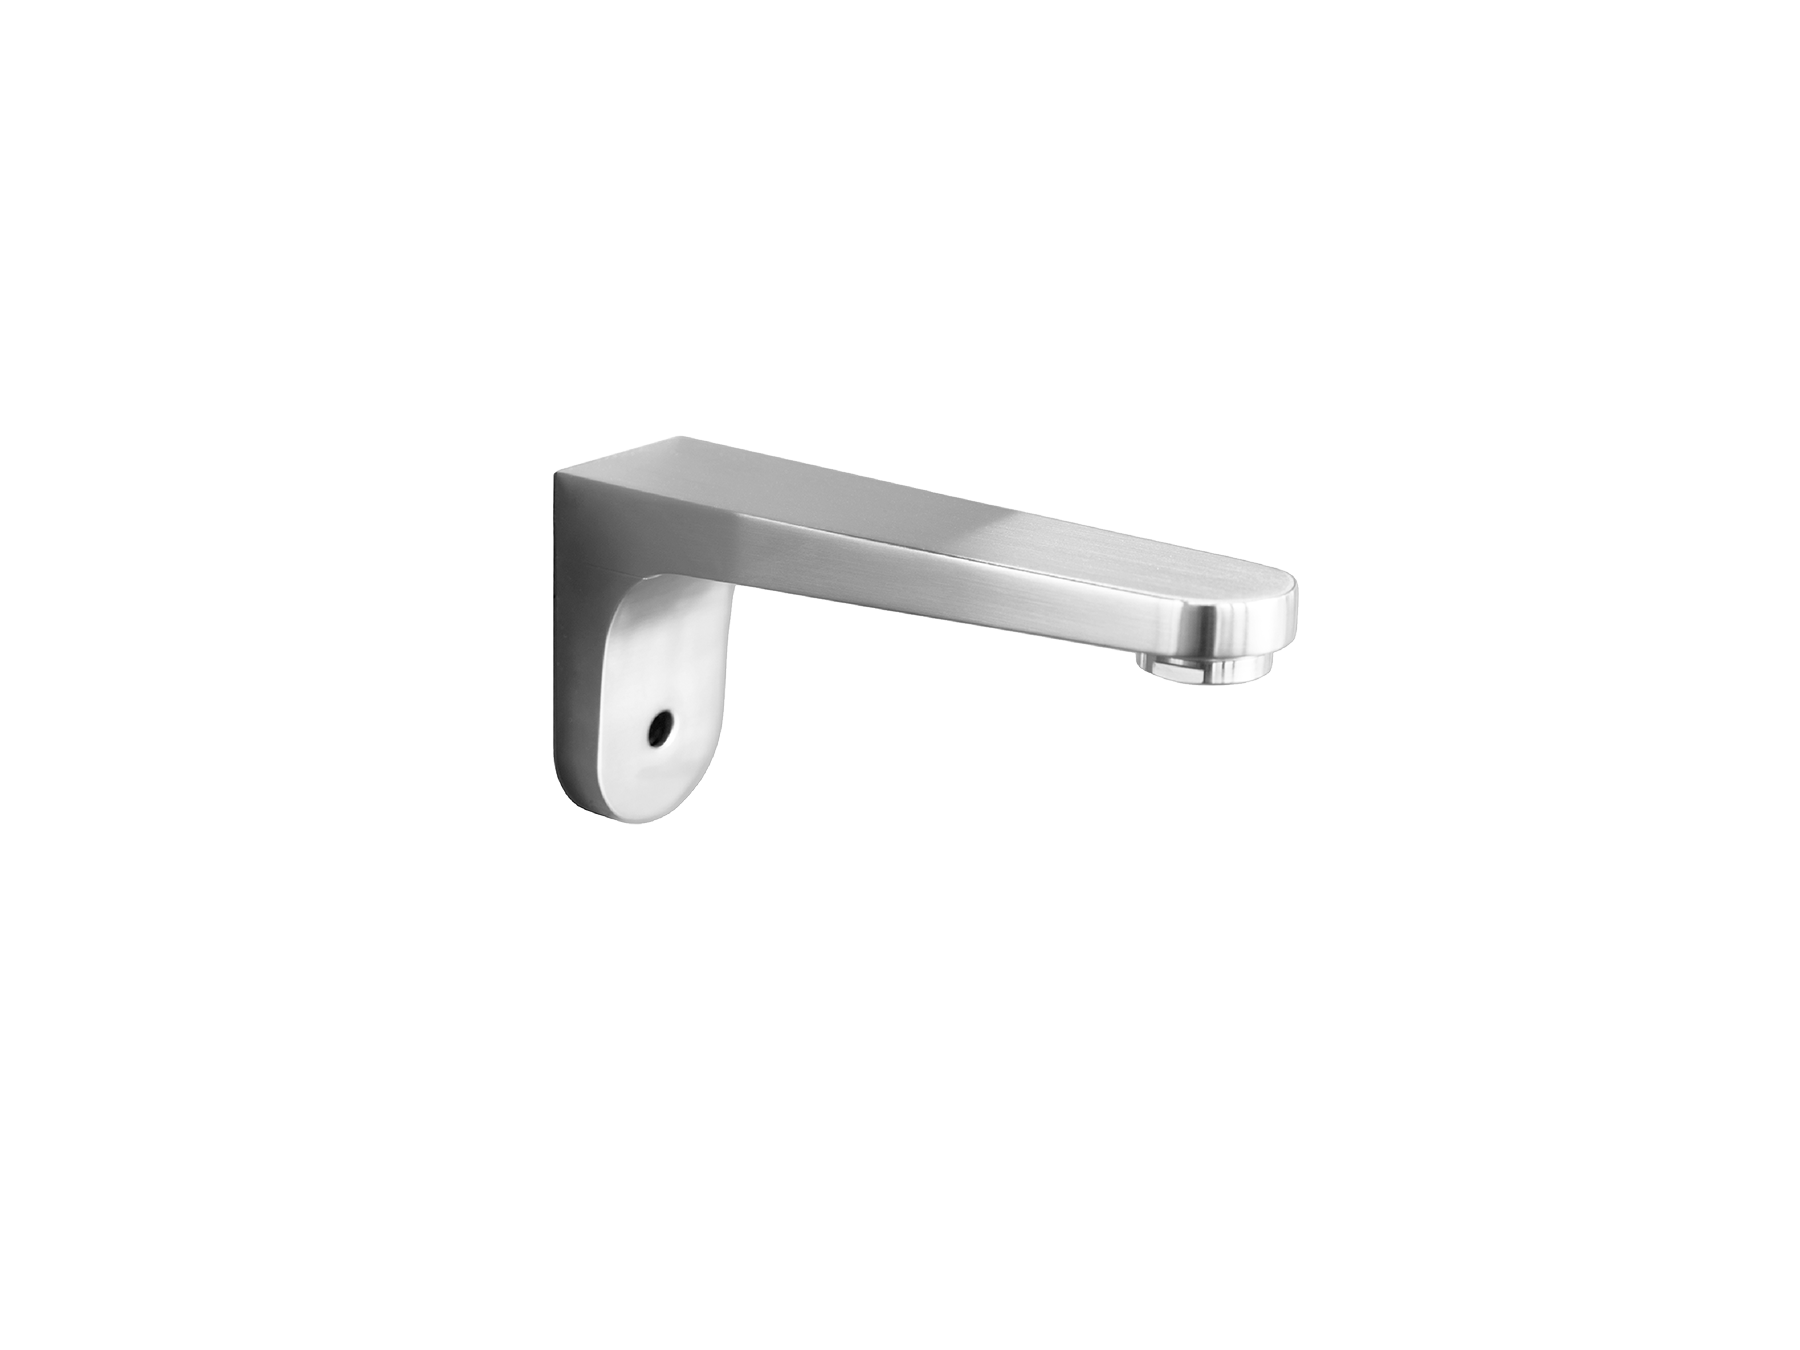 Infrared washbasin tap mains-powered, wall-mounted, cold